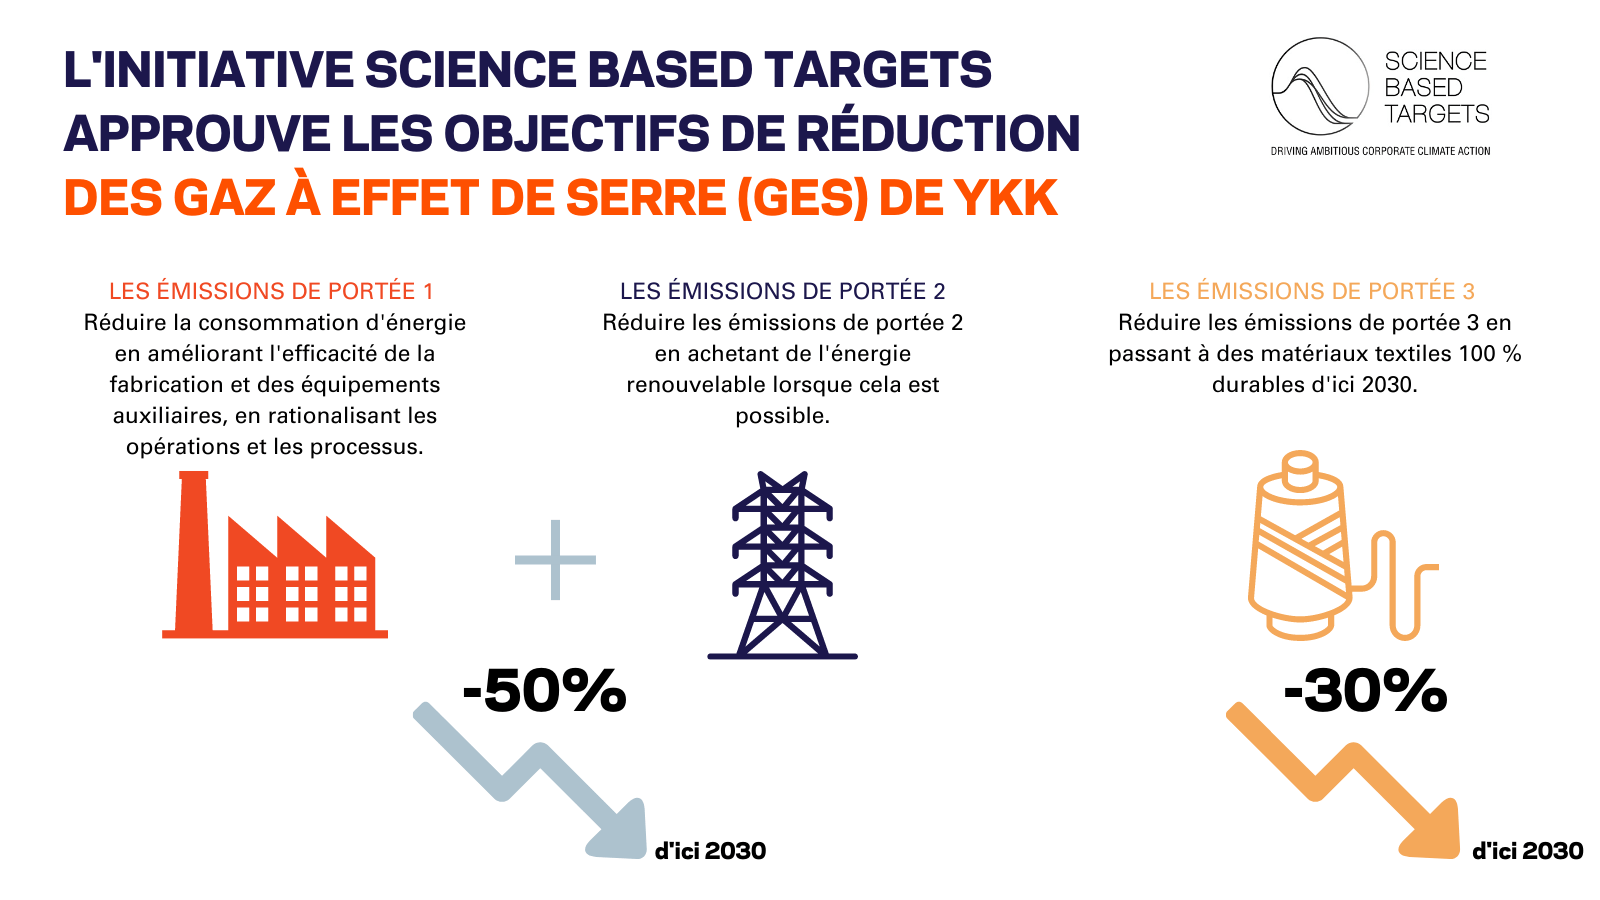 Science Based Targets Initiative Approves YKK’s Greenhouse Gas (GHG) Reduction Targets